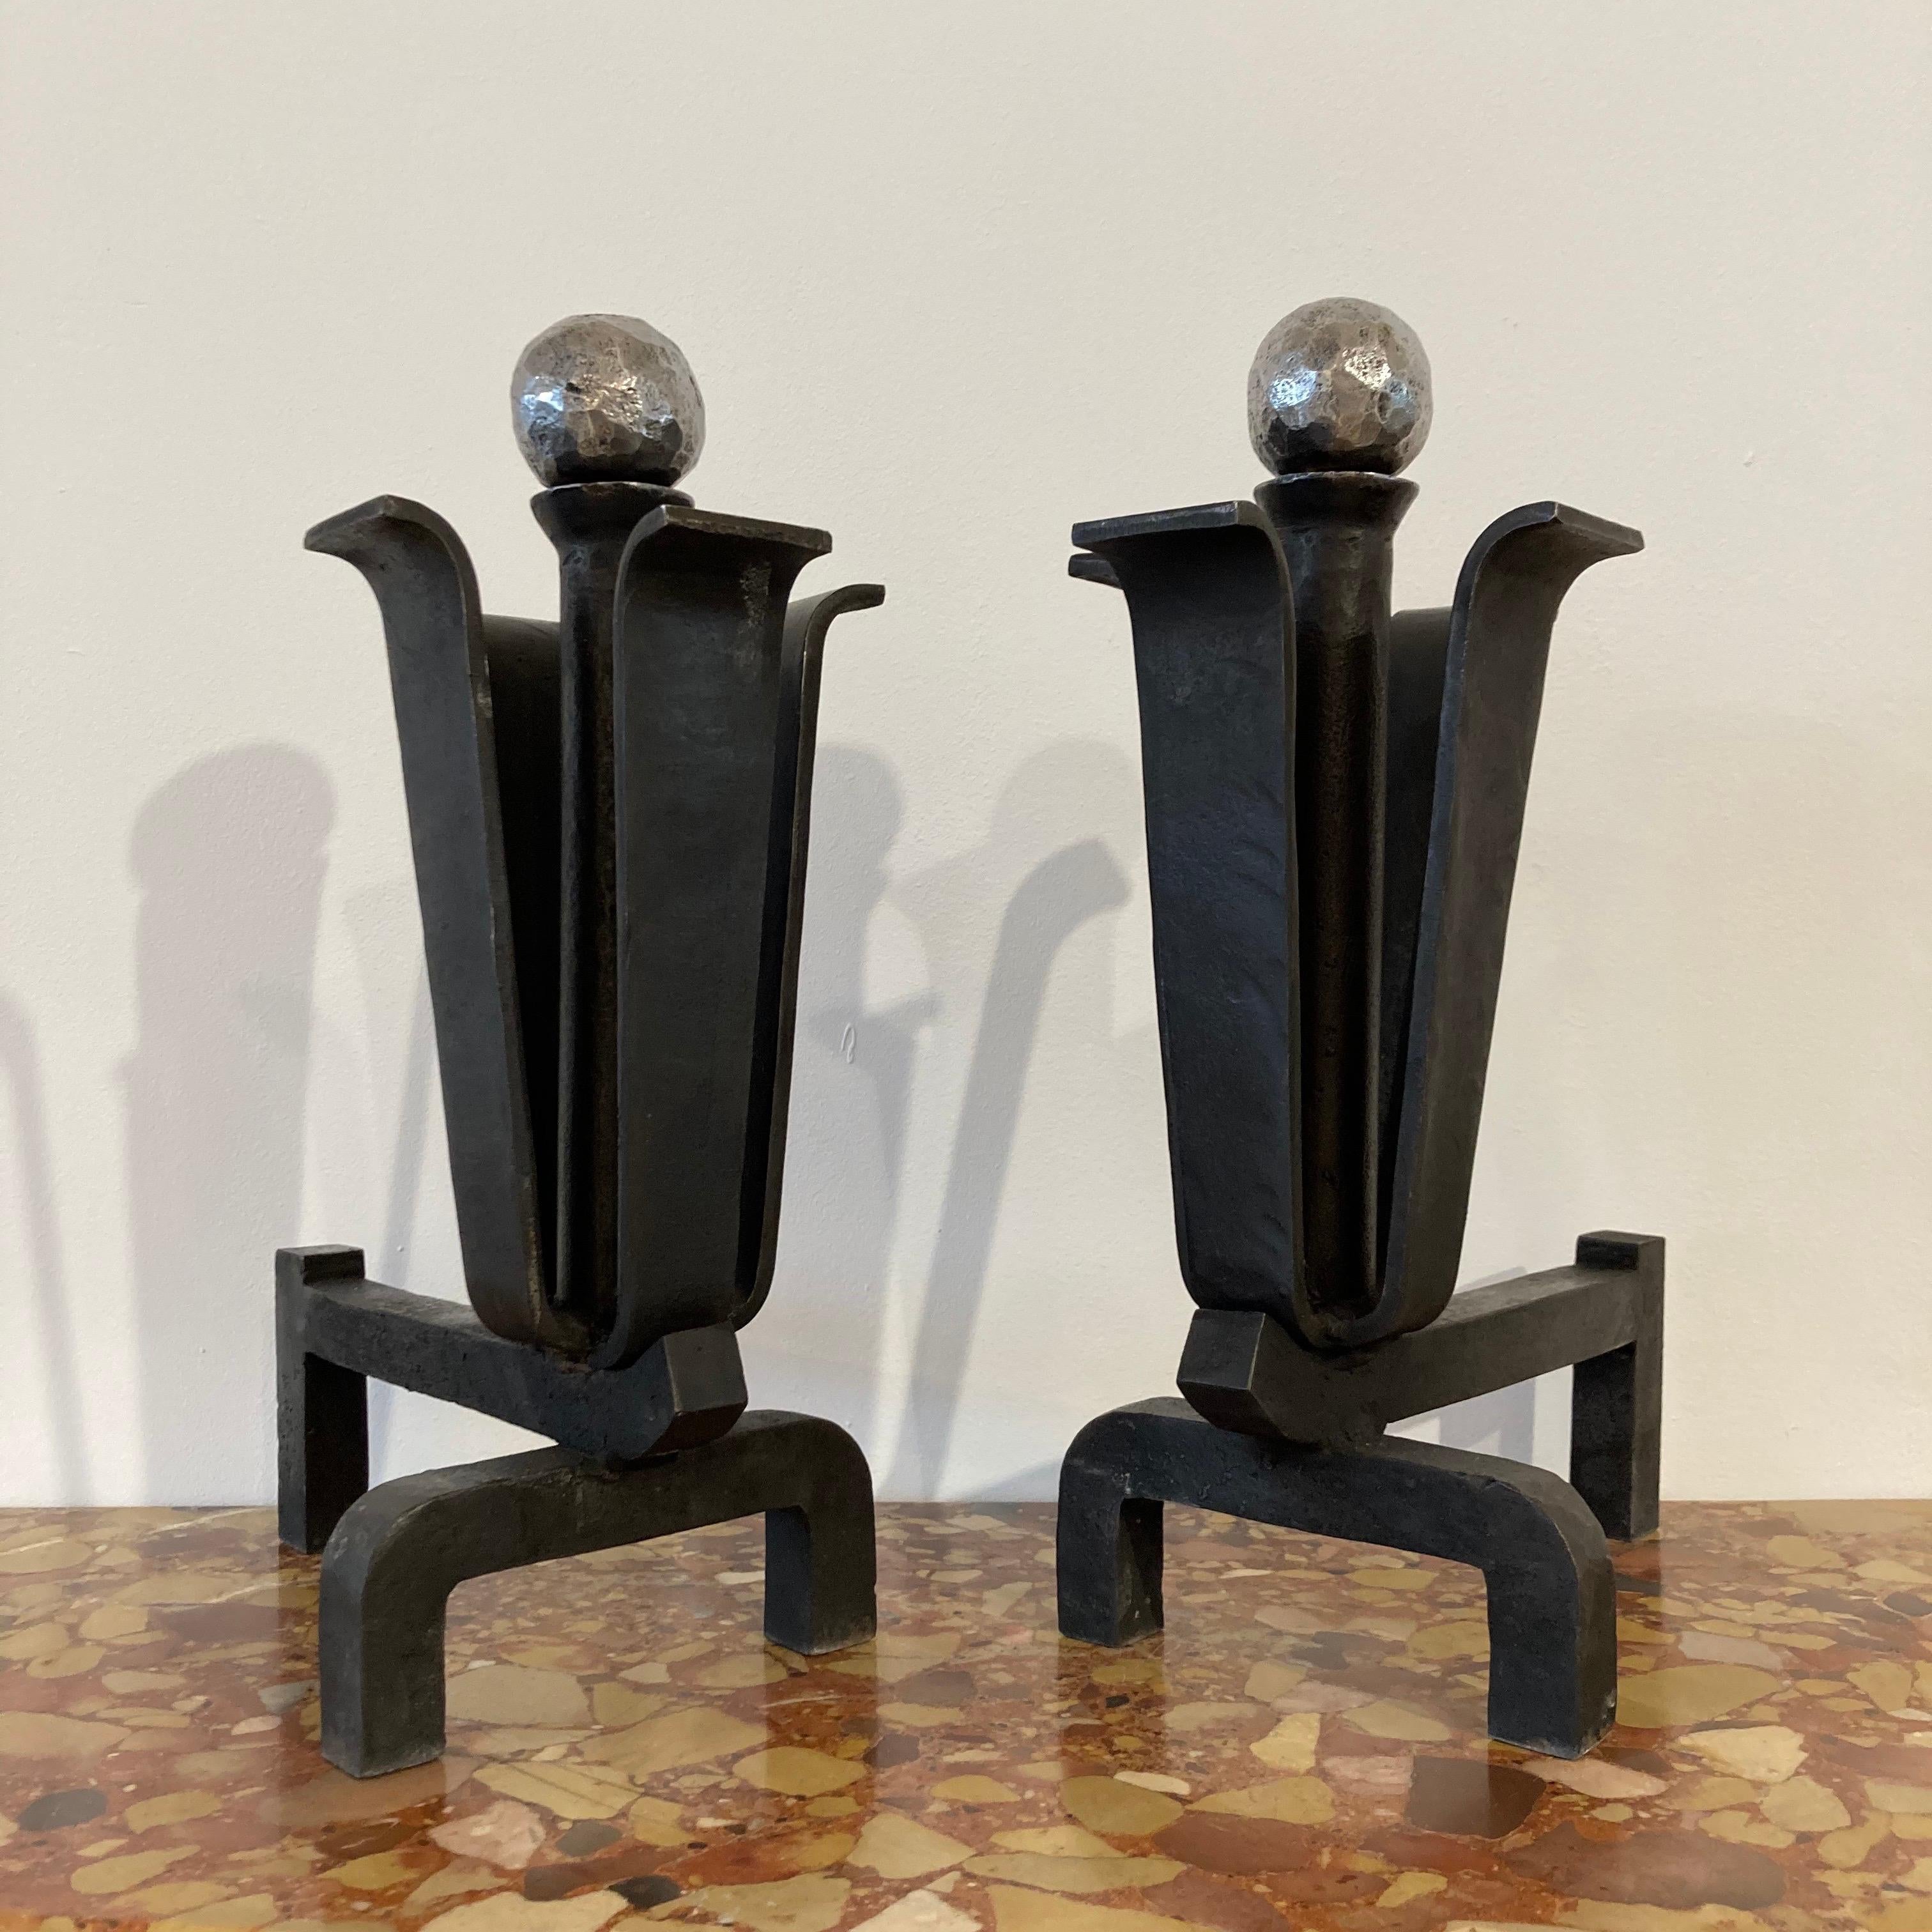 Stylish Pair of Mid-Century Modern Andirons or Firebogs For Sale 1